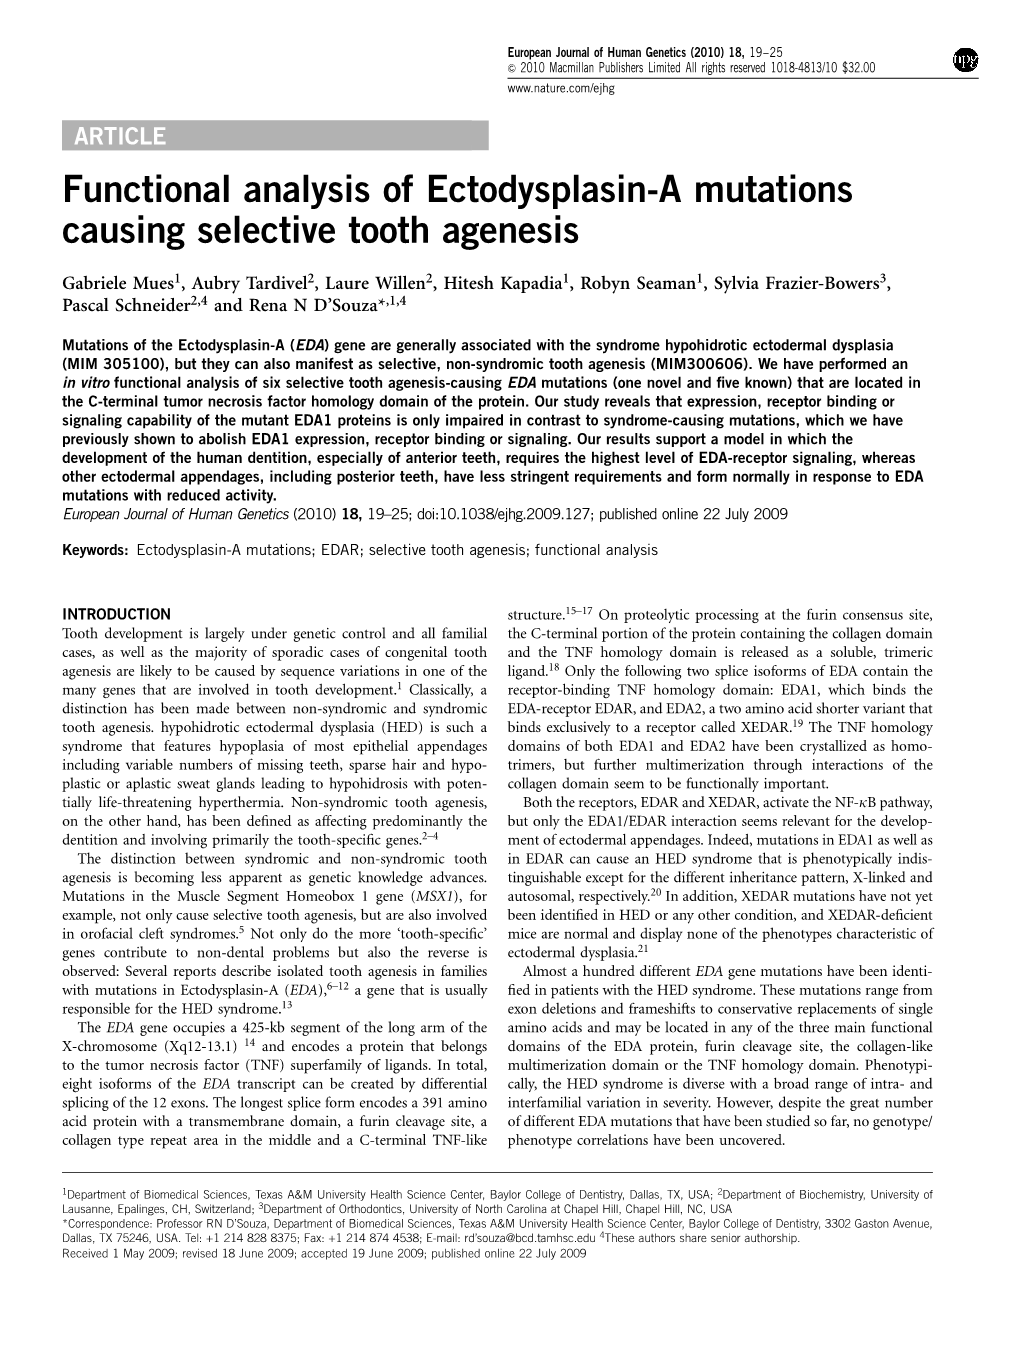 Functional Analysis of Ectodysplasin-A Mutations Causing Selective Tooth Agenesis